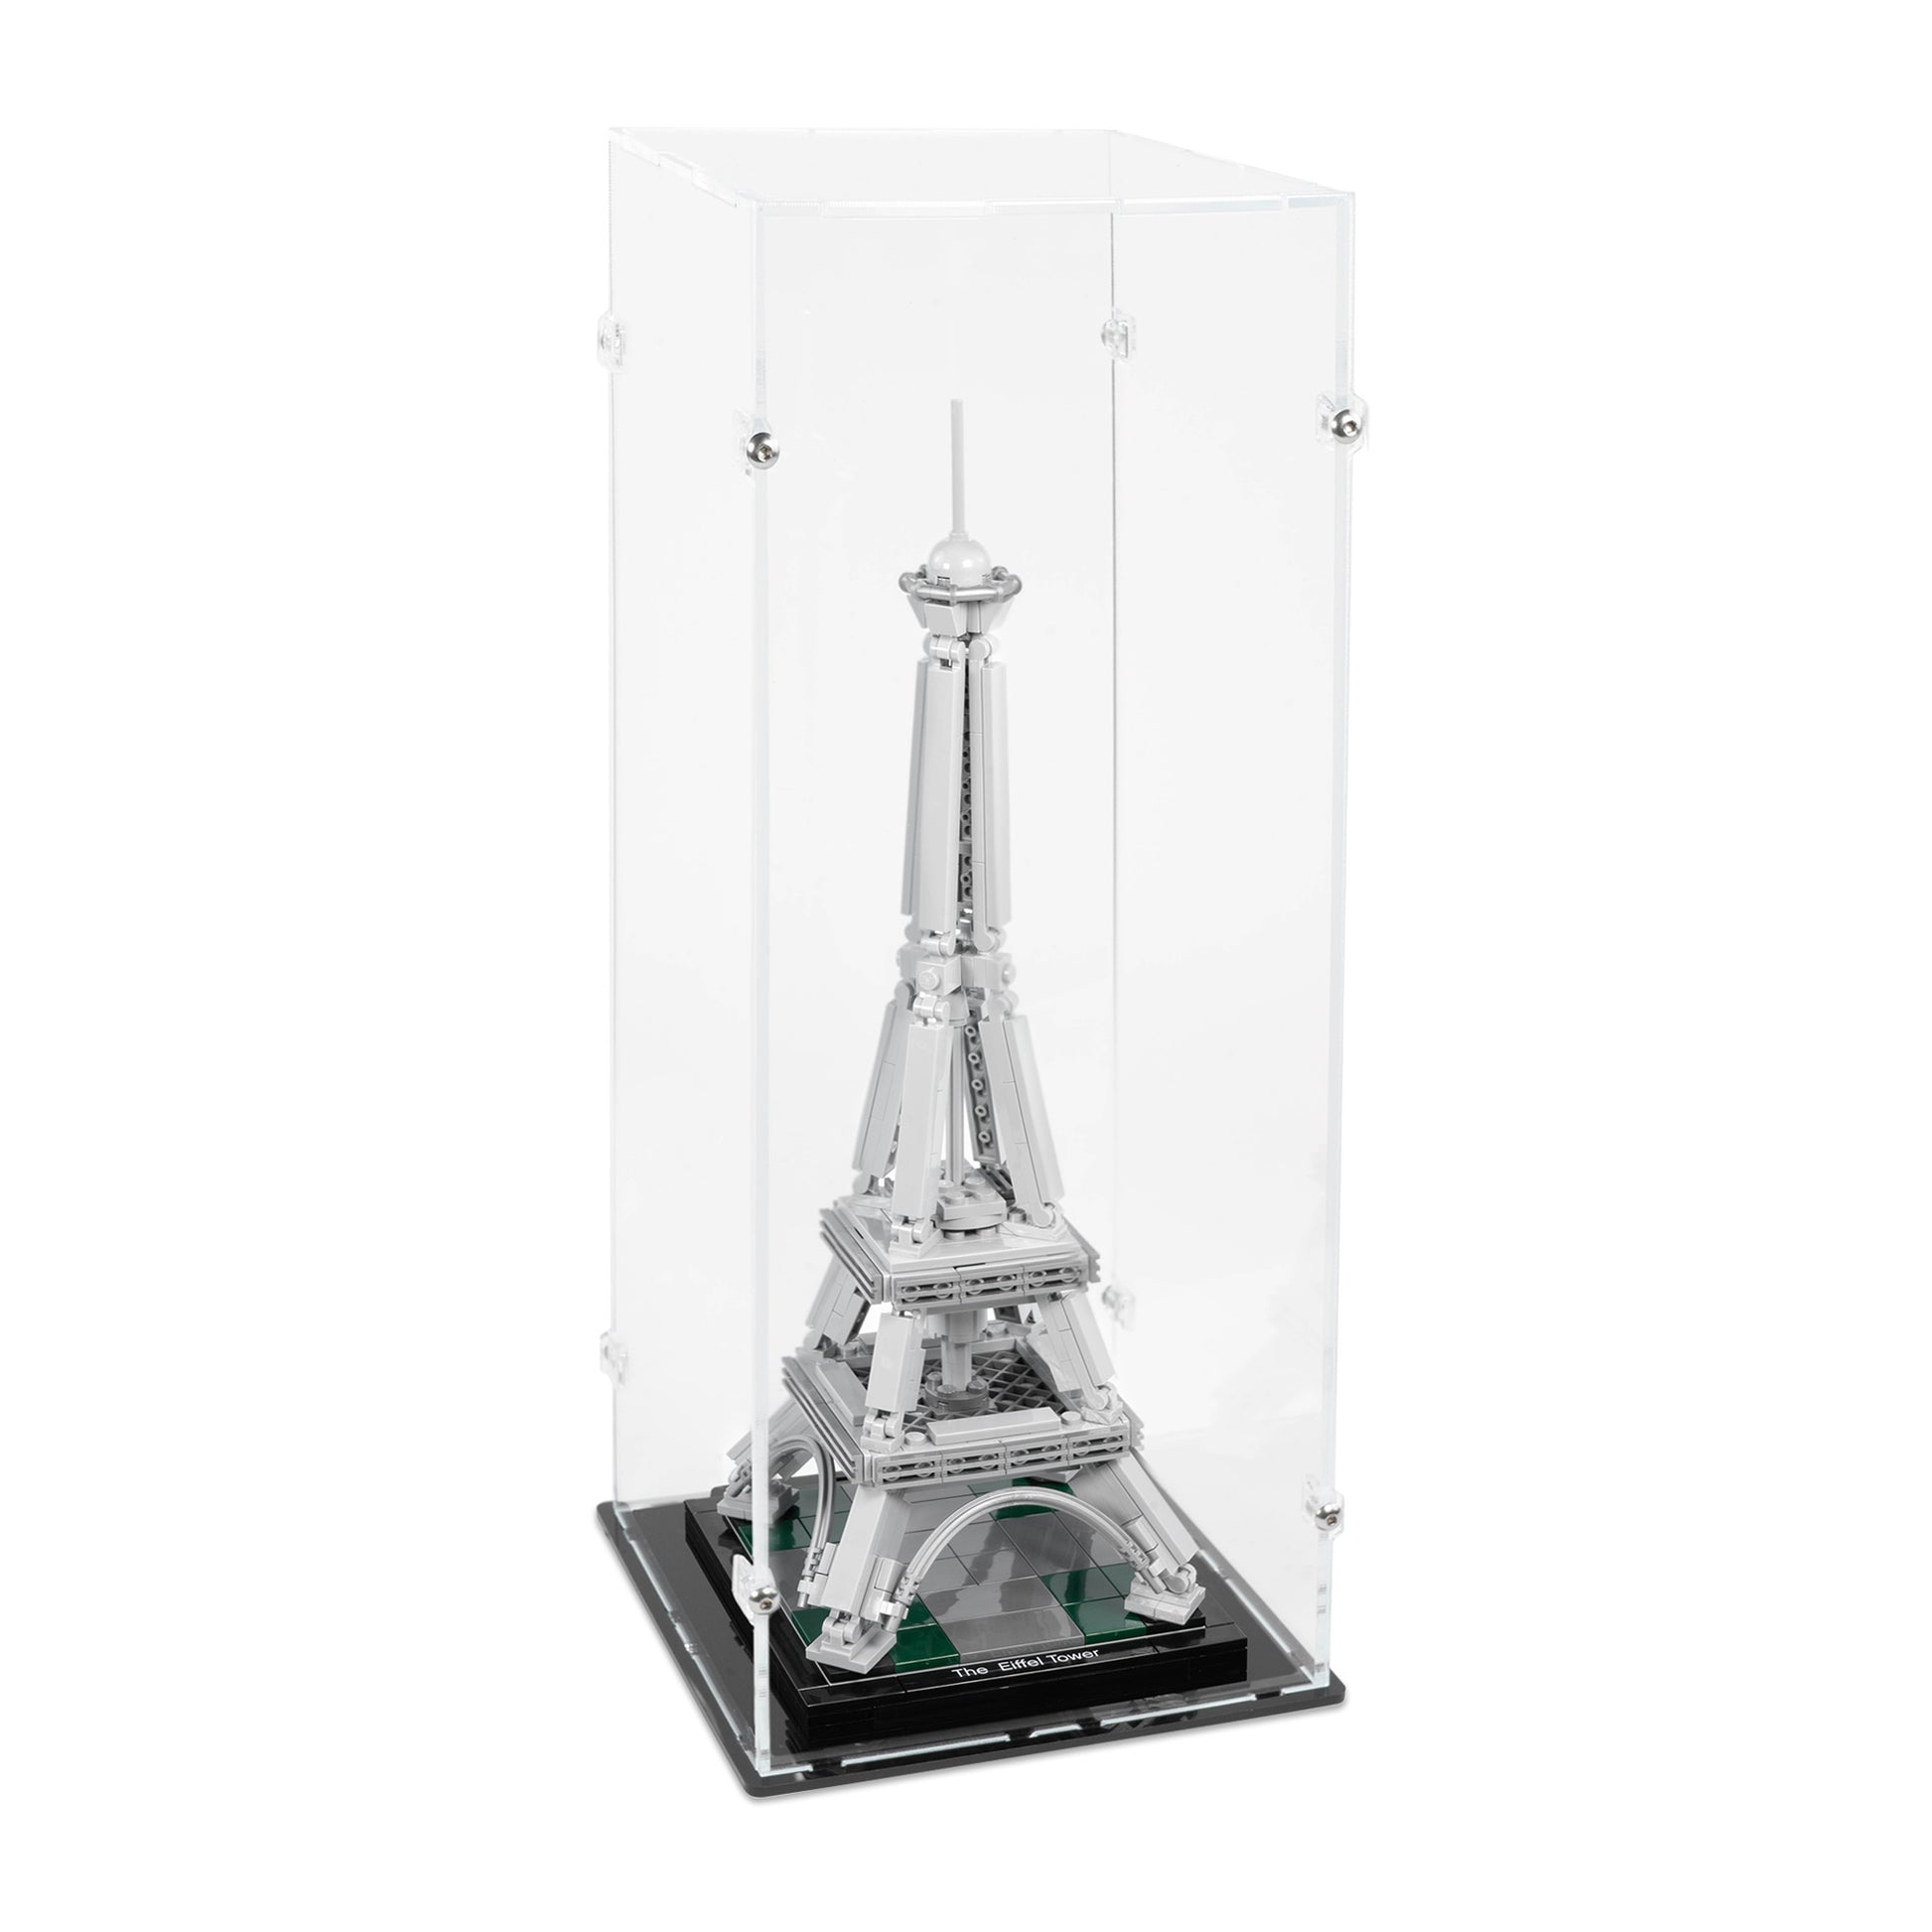 Angled top view of LEGO 21019 The Eiffel Tower Display Case.